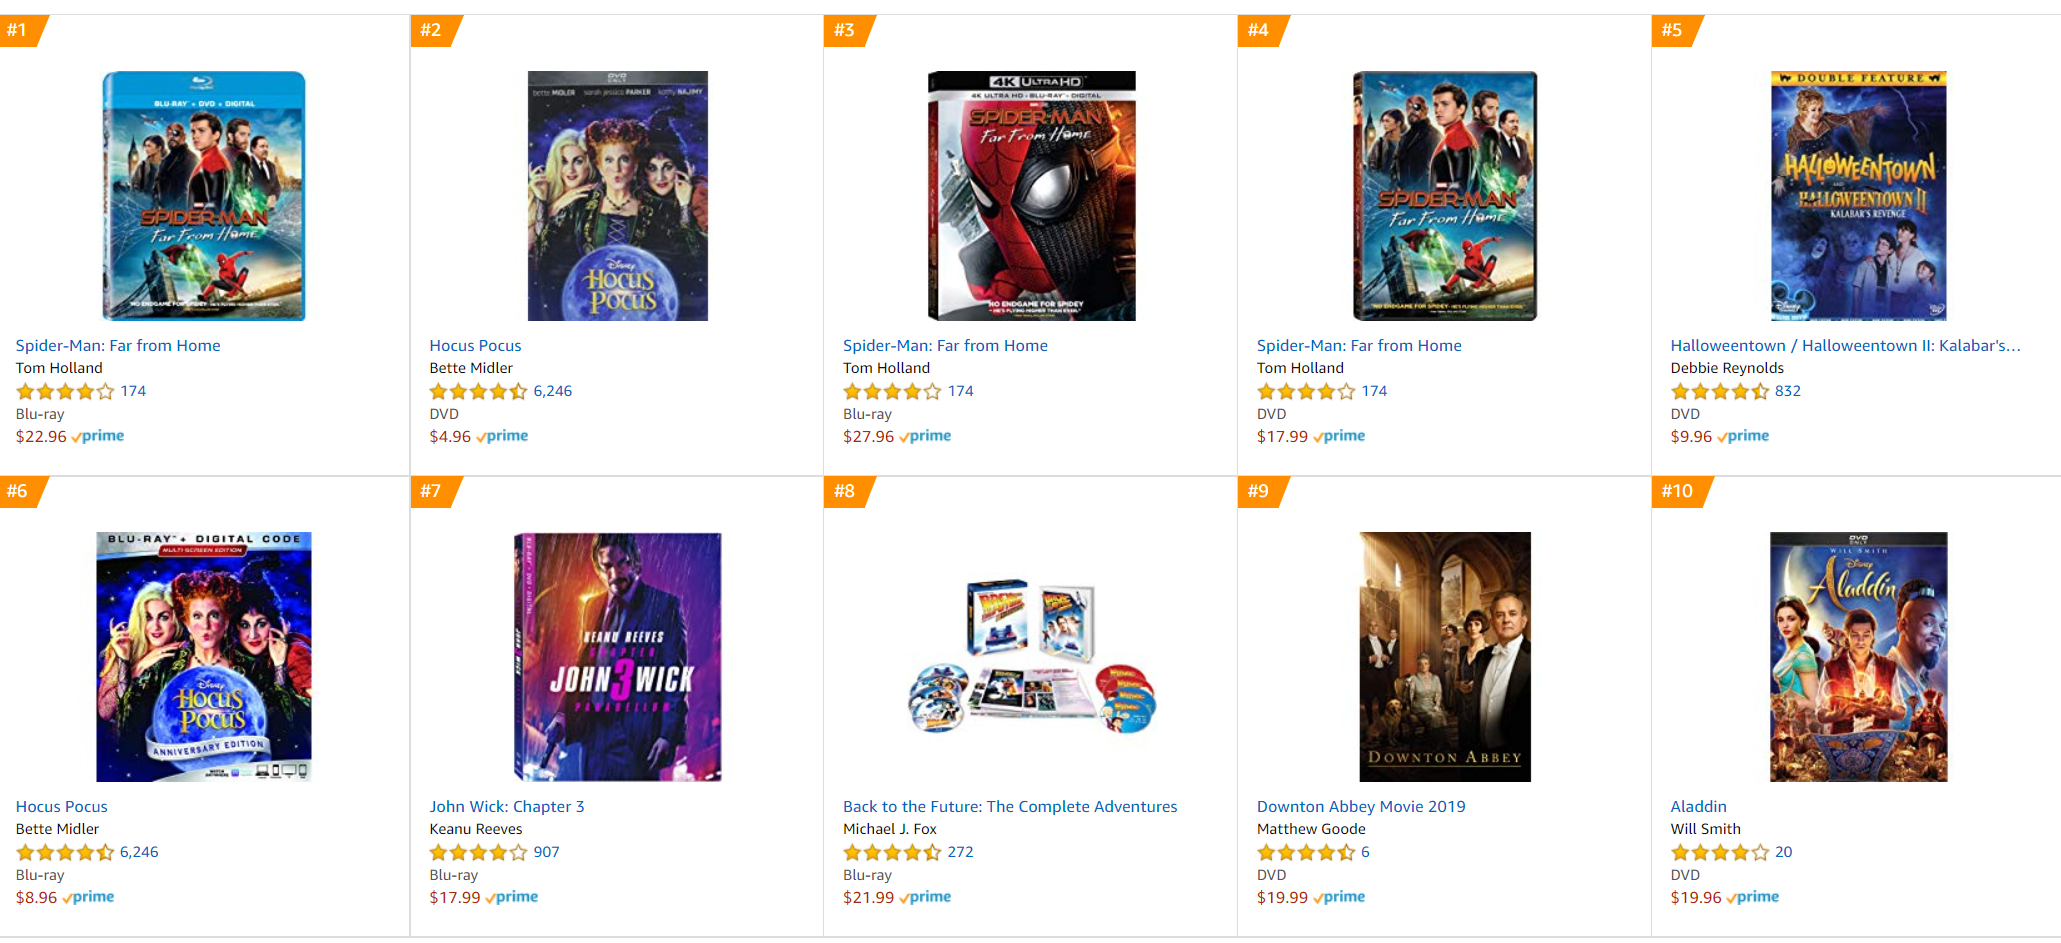 amazon gated categories for videos and blu-rays